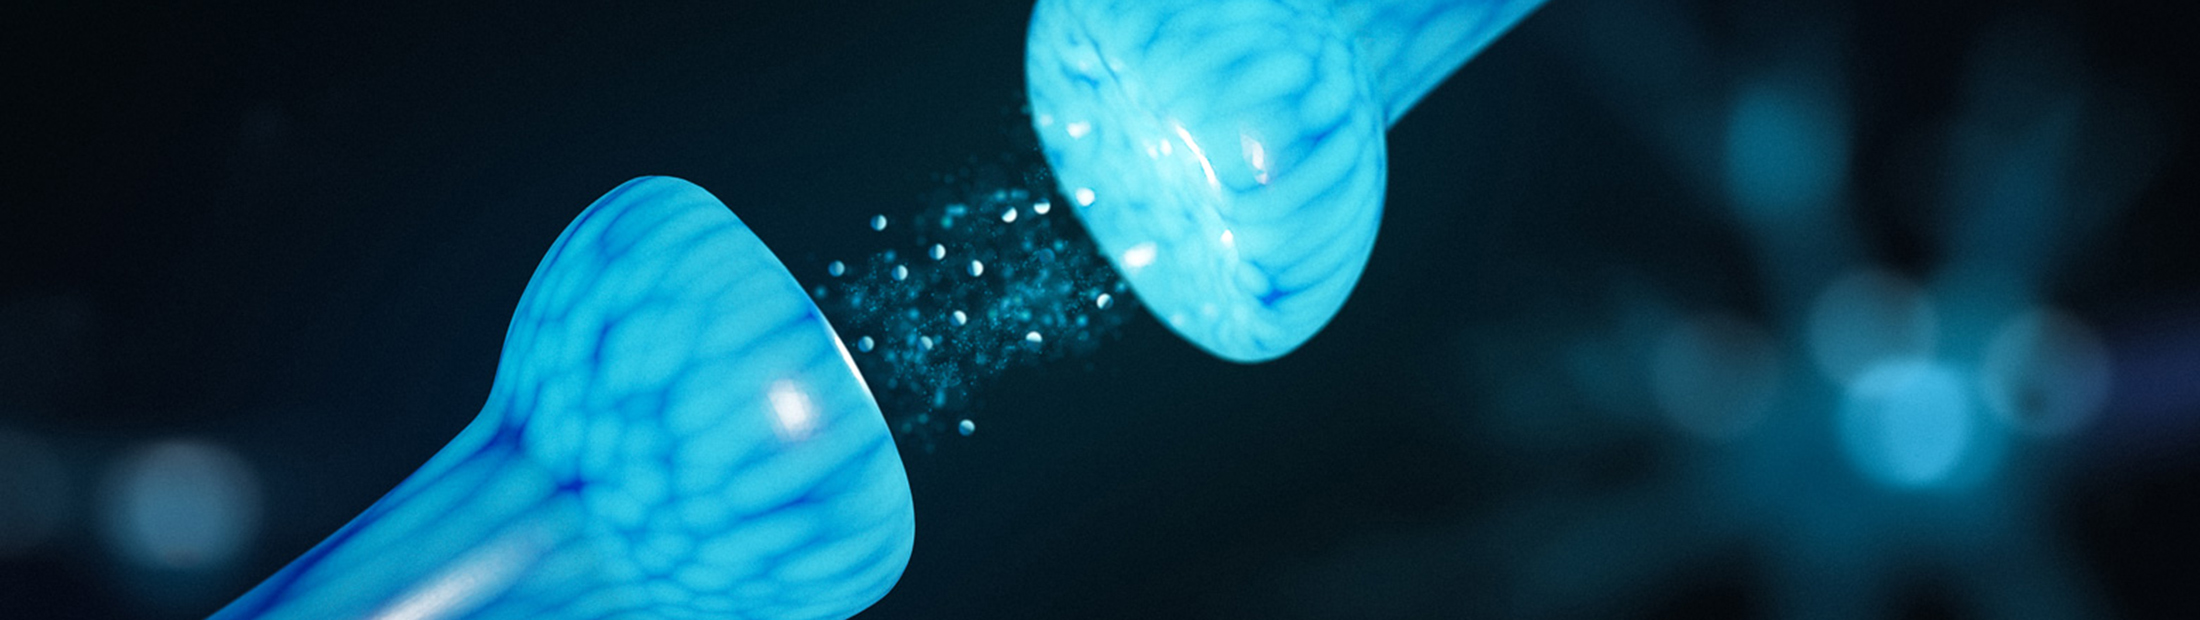 Two blue bulbs facing each other with small particles floating in between.